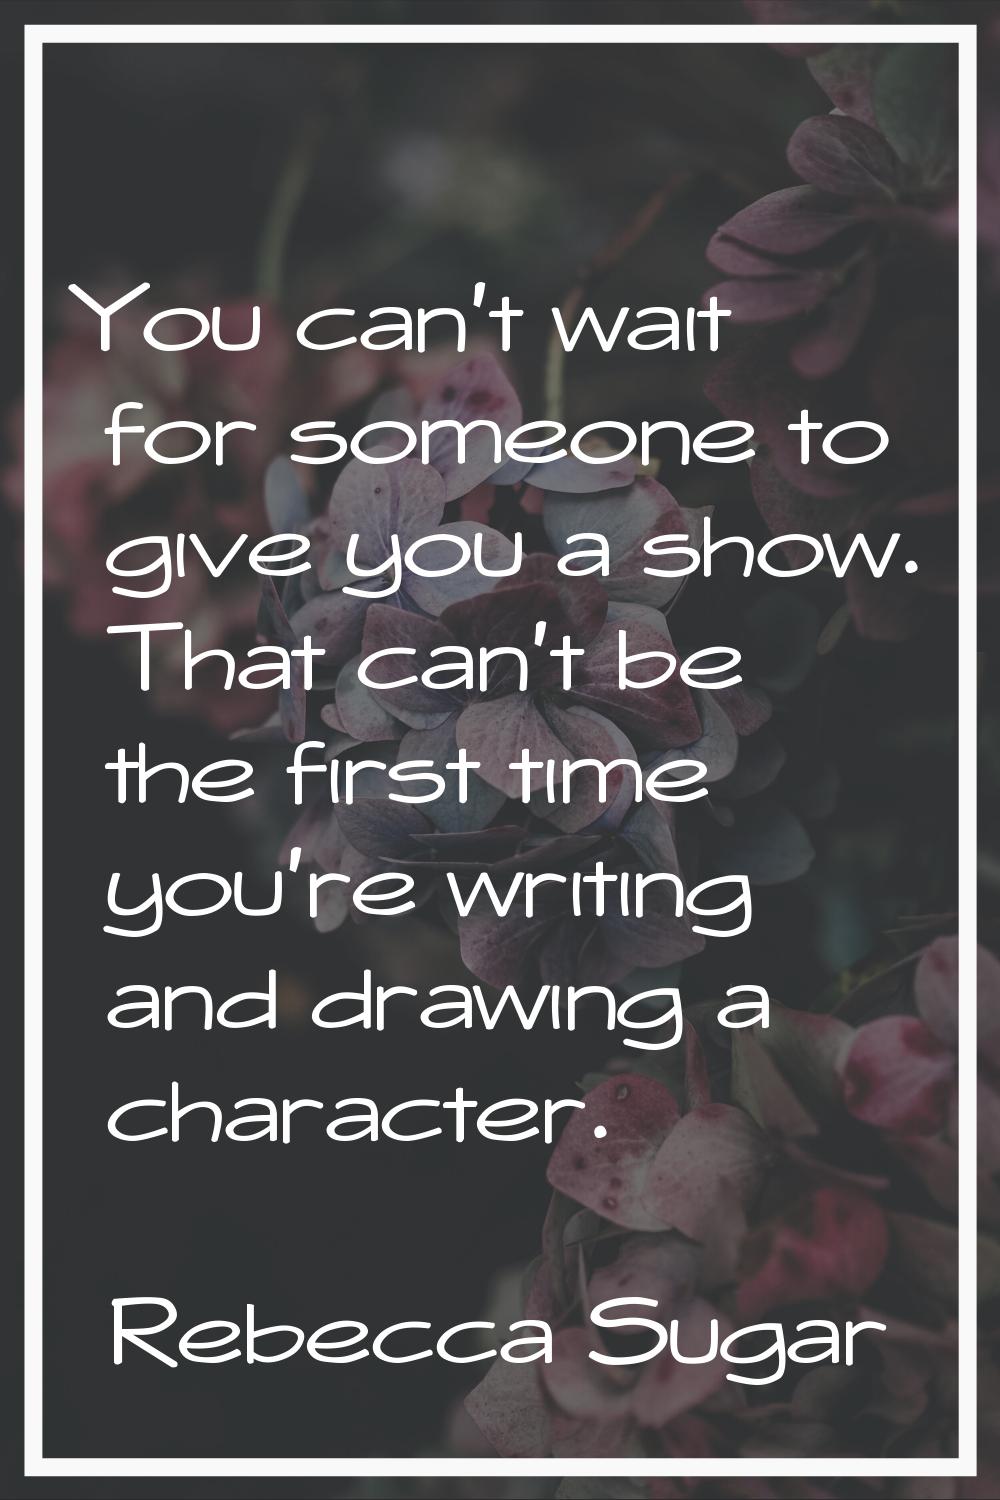 You can't wait for someone to give you a show. That can't be the first time you're writing and draw